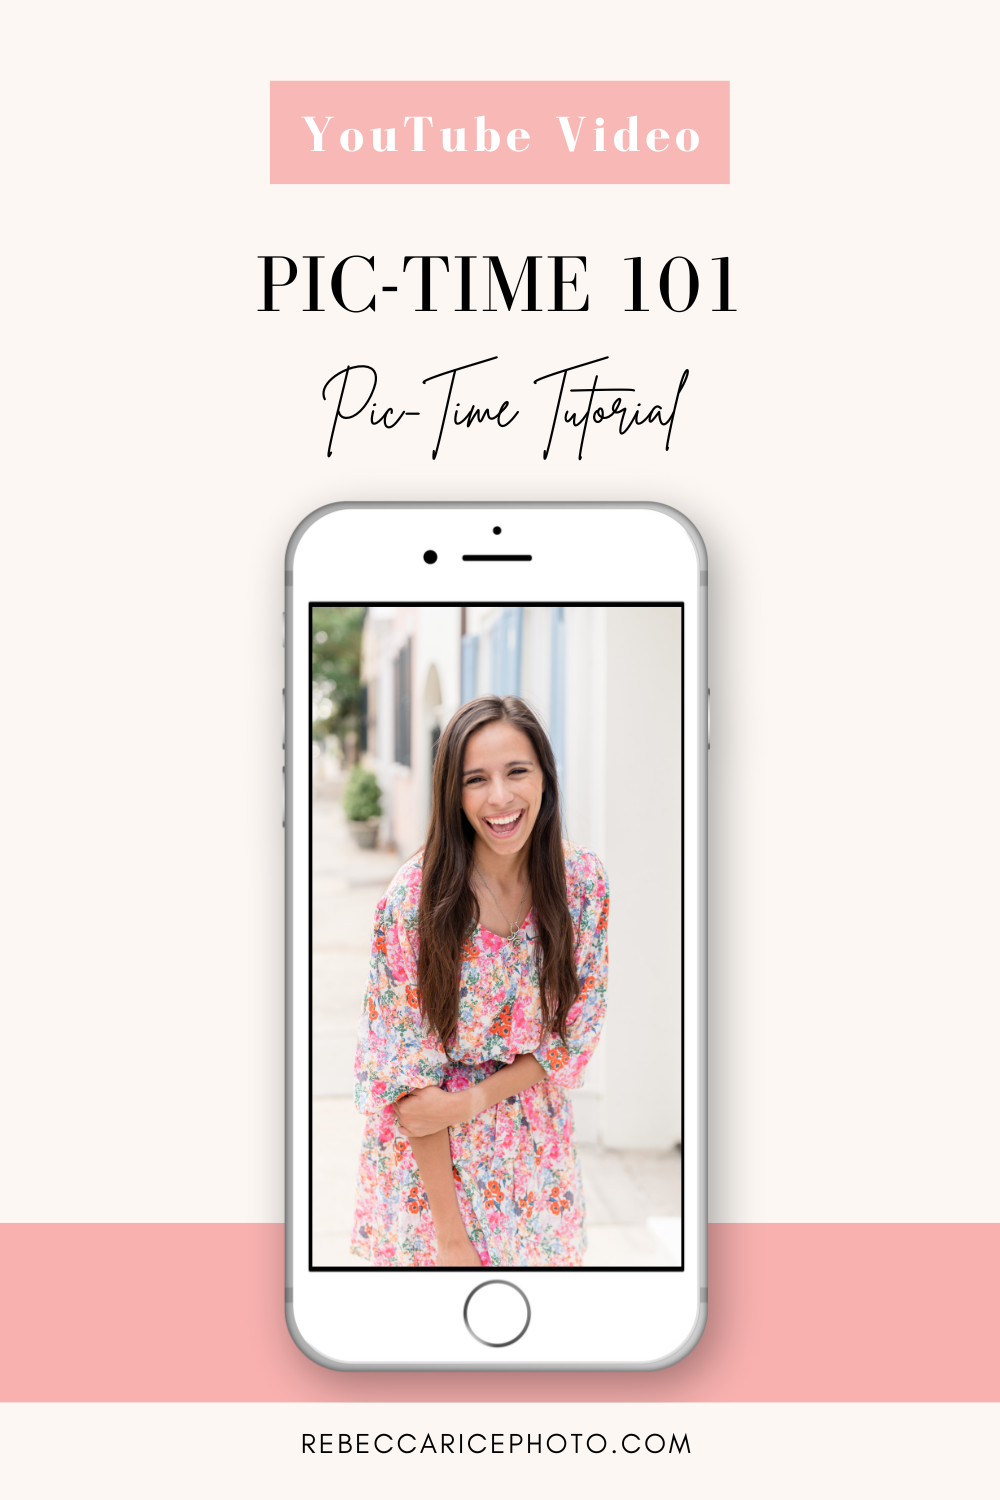 PicTime 101 | Pic-Time Tutorial